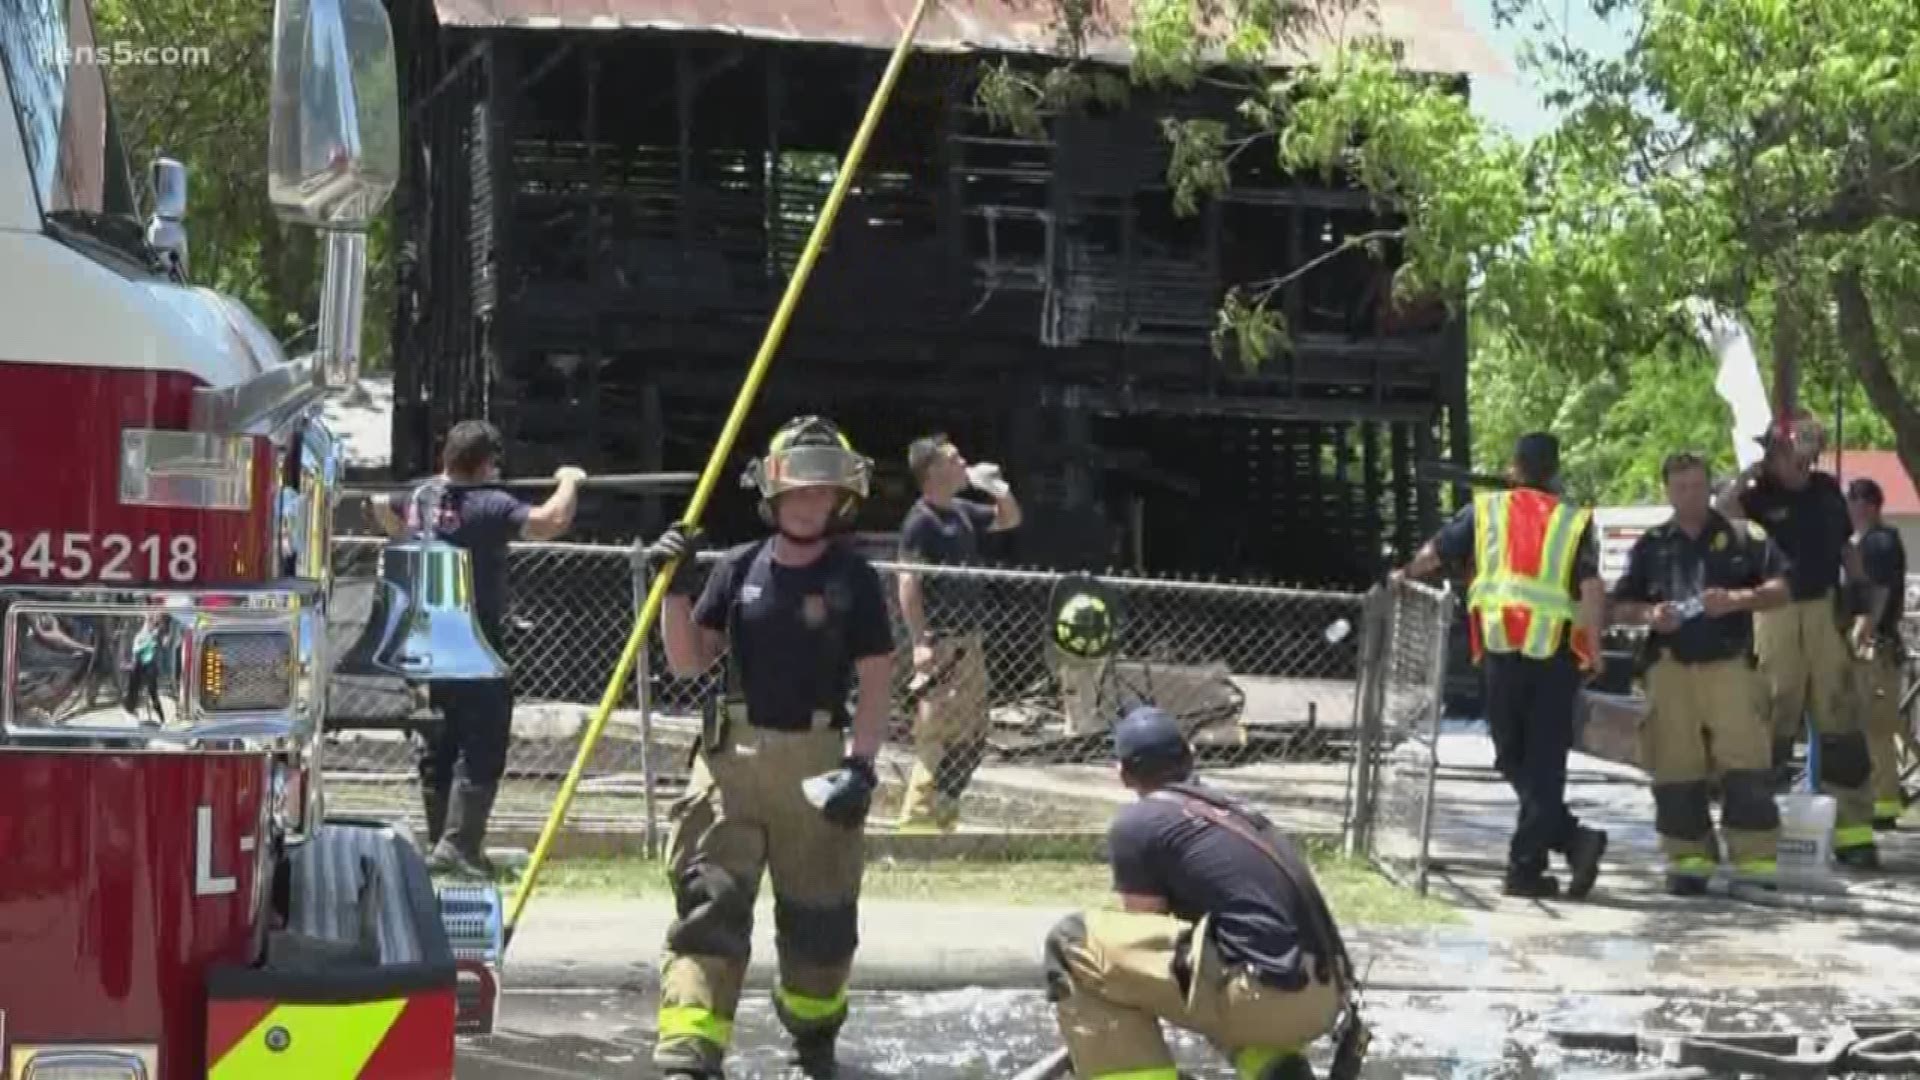 An Easter barbecue turned scary when a nearby garage caught on fire. The fire started around 2 p.m. Sunday afternoon on Steves avenue, near I-37.